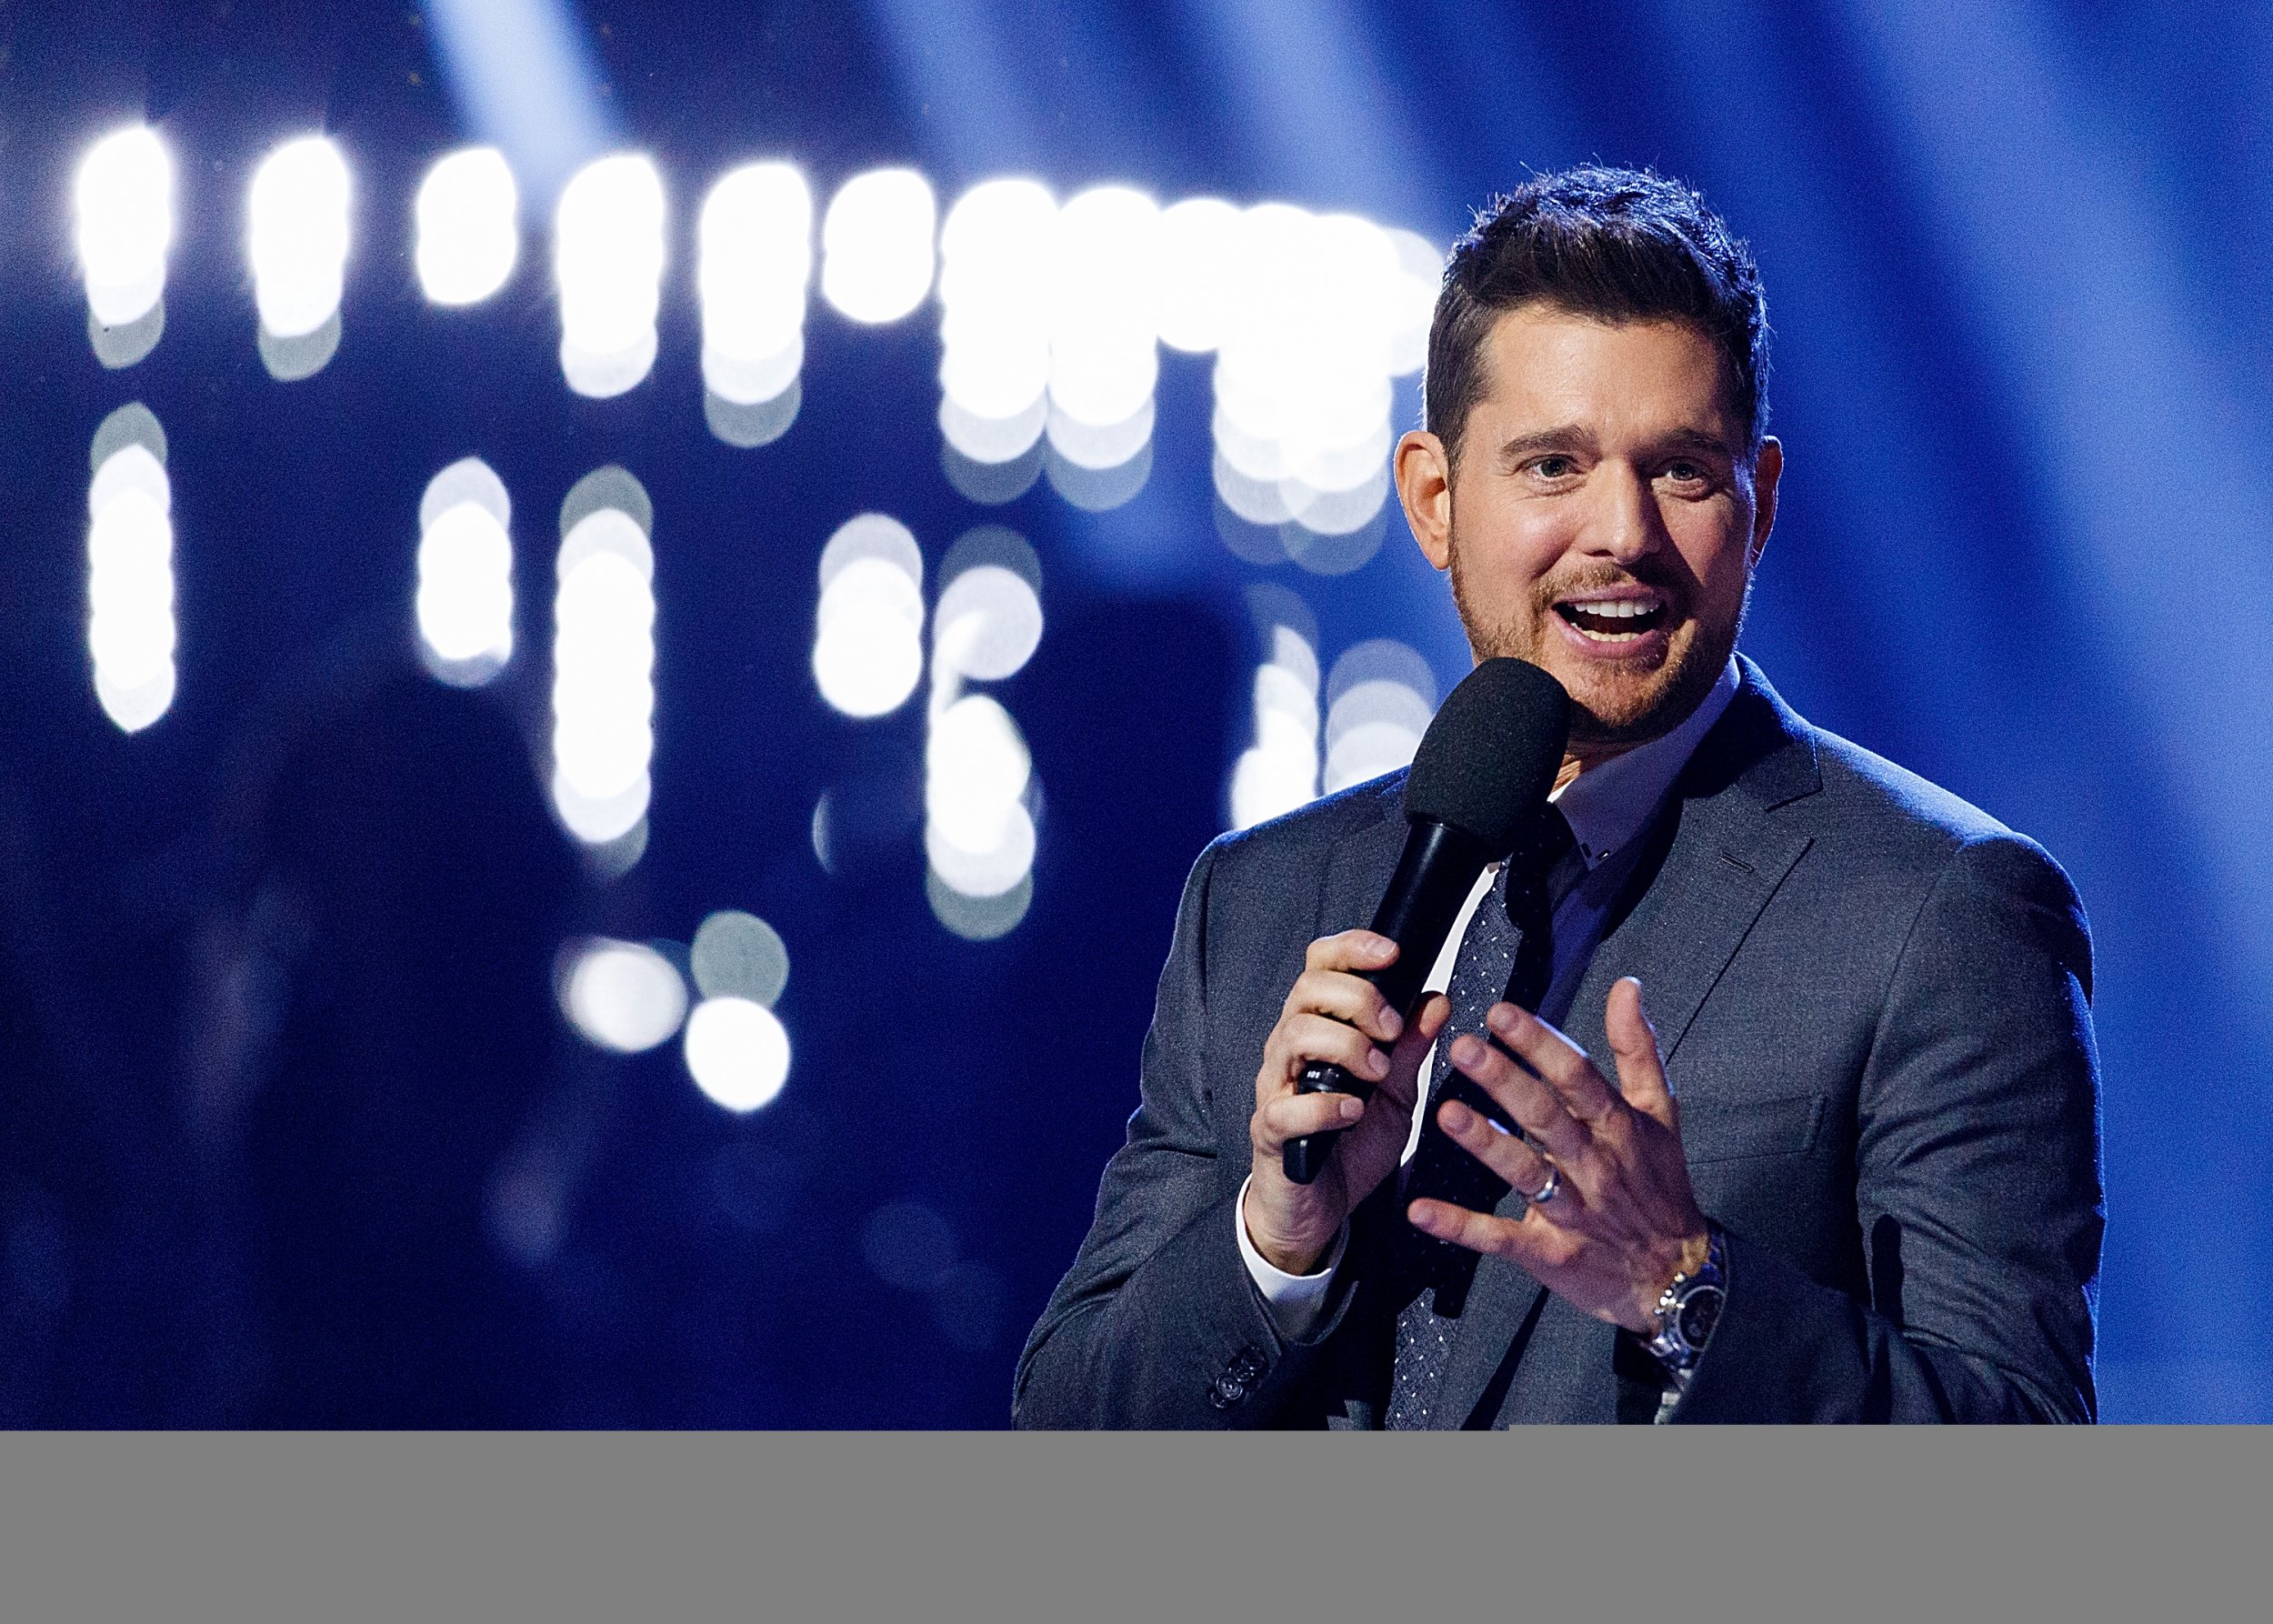 Is Michael Bublé really quitting music? 